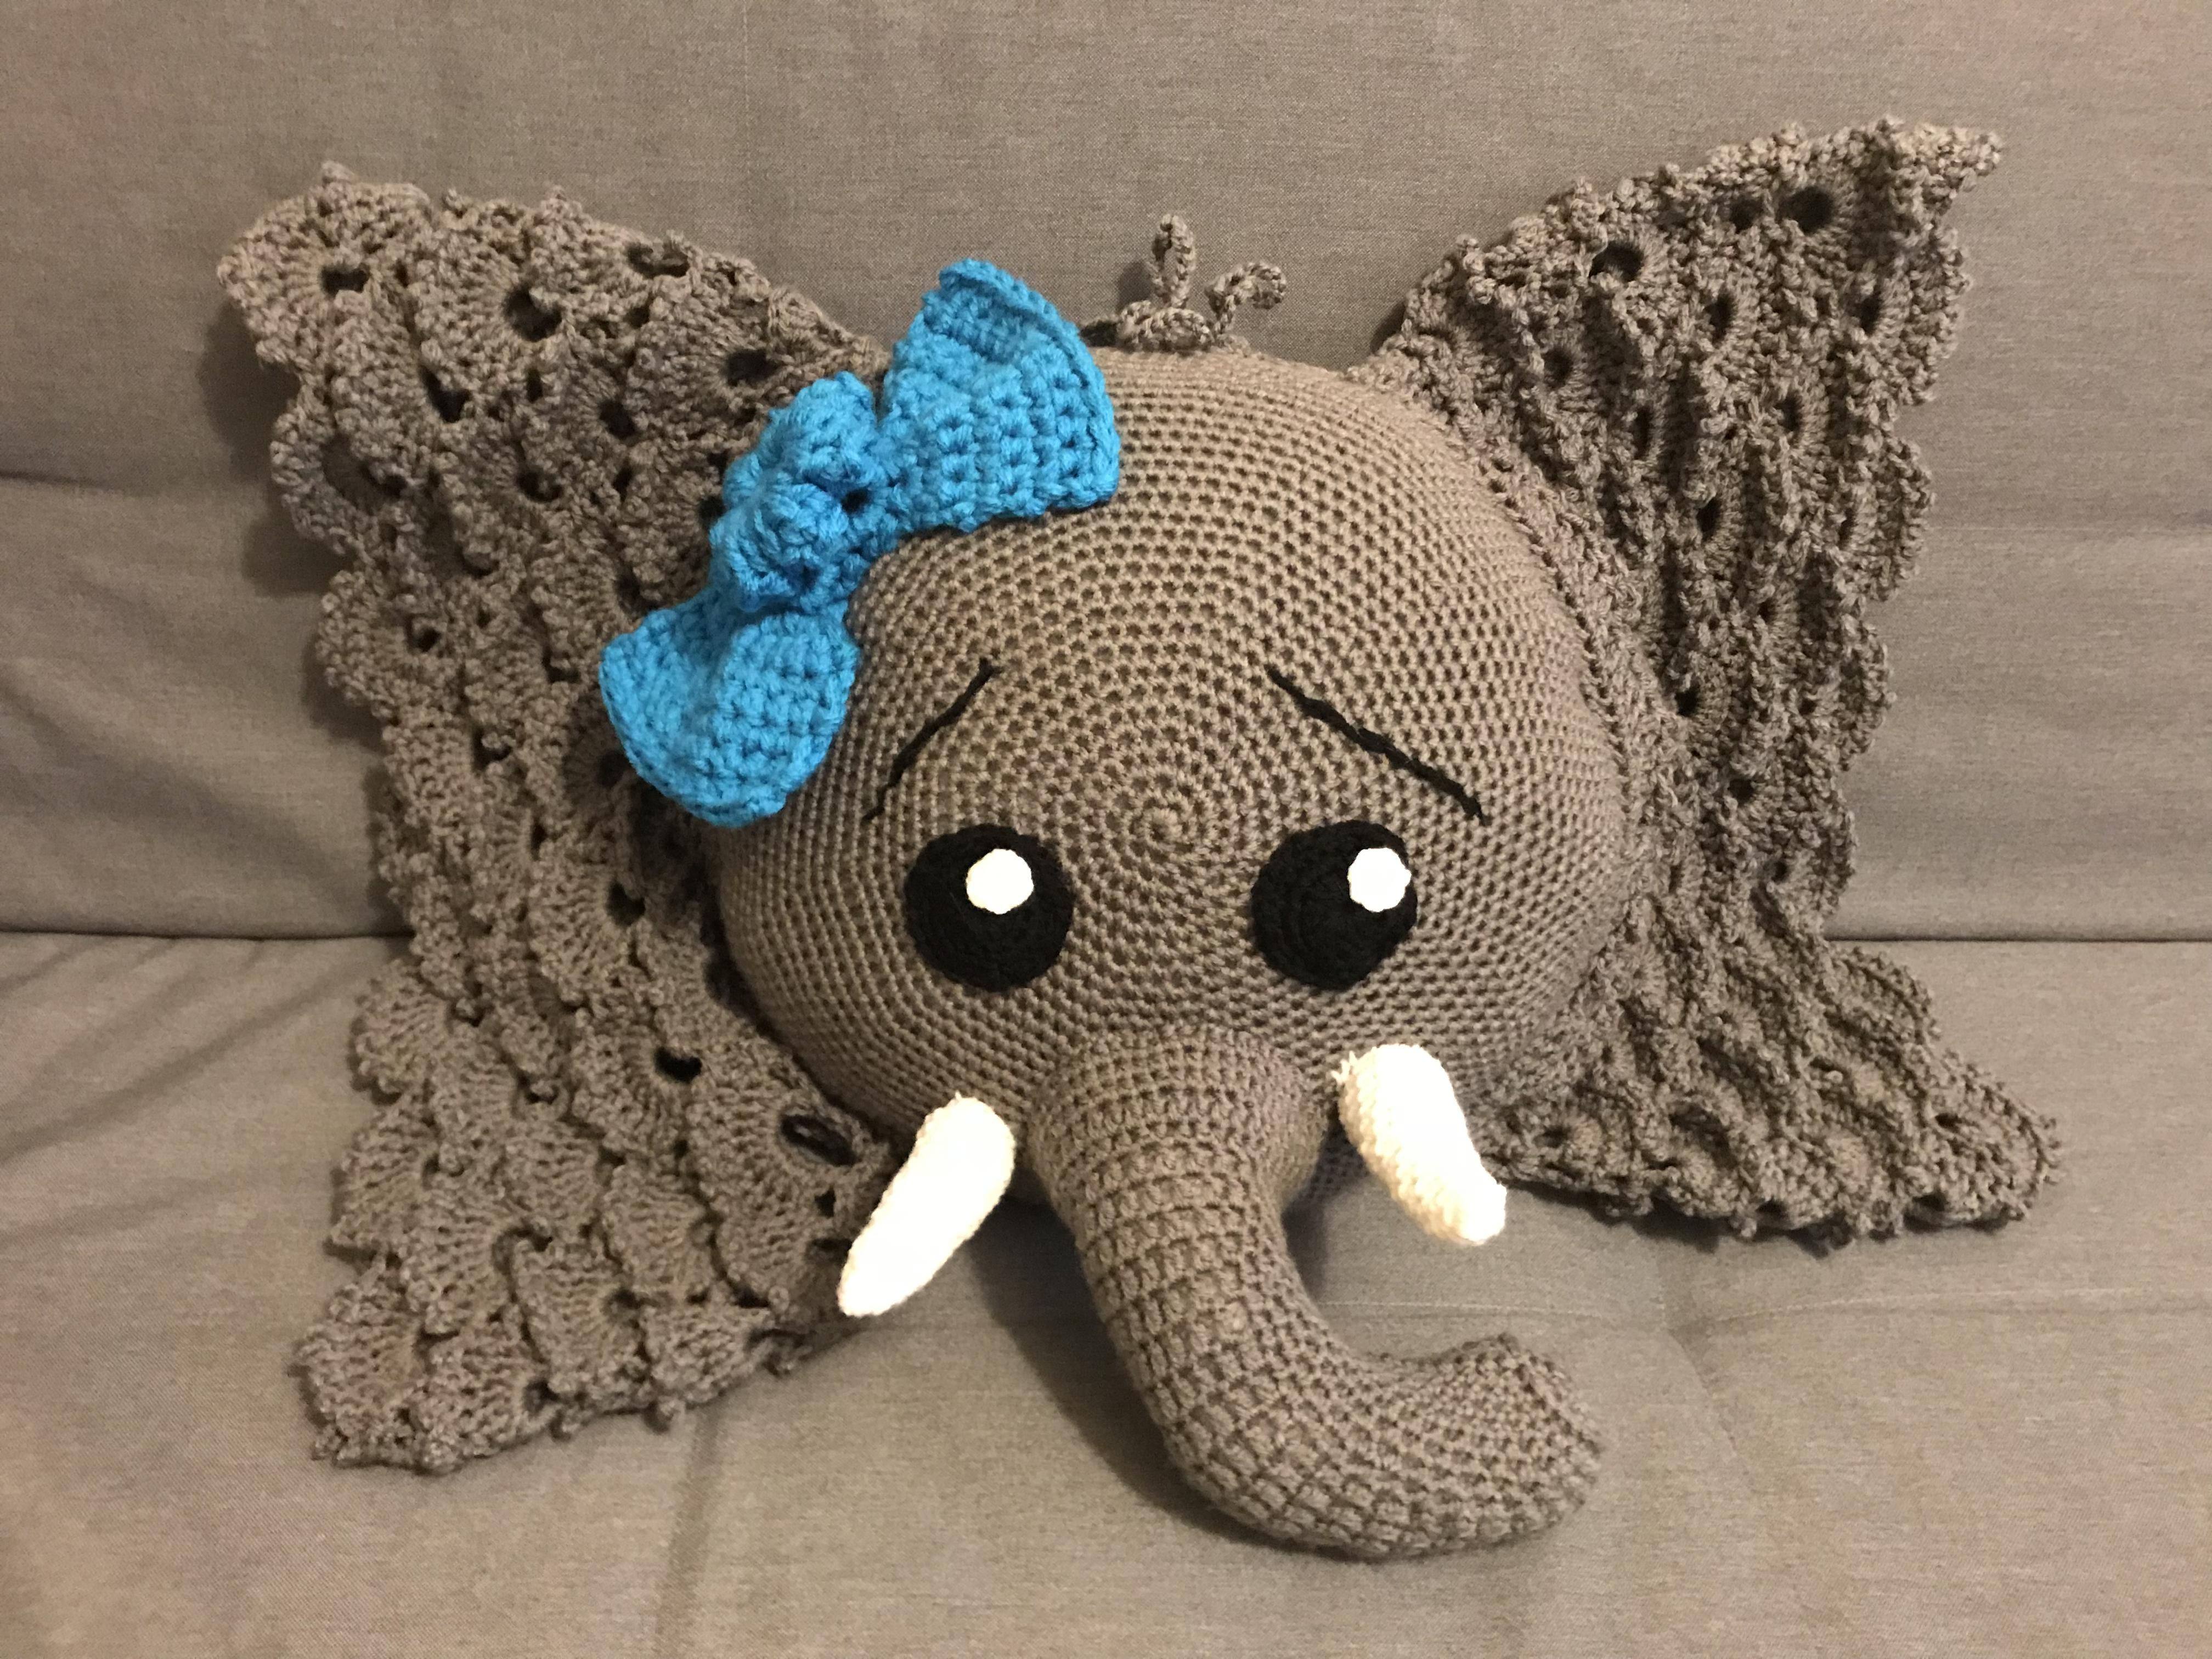 Crochet Elephant Pillow Pattern Fo Elephant Pillow Easier Than I Thought And Super Cute Crochet